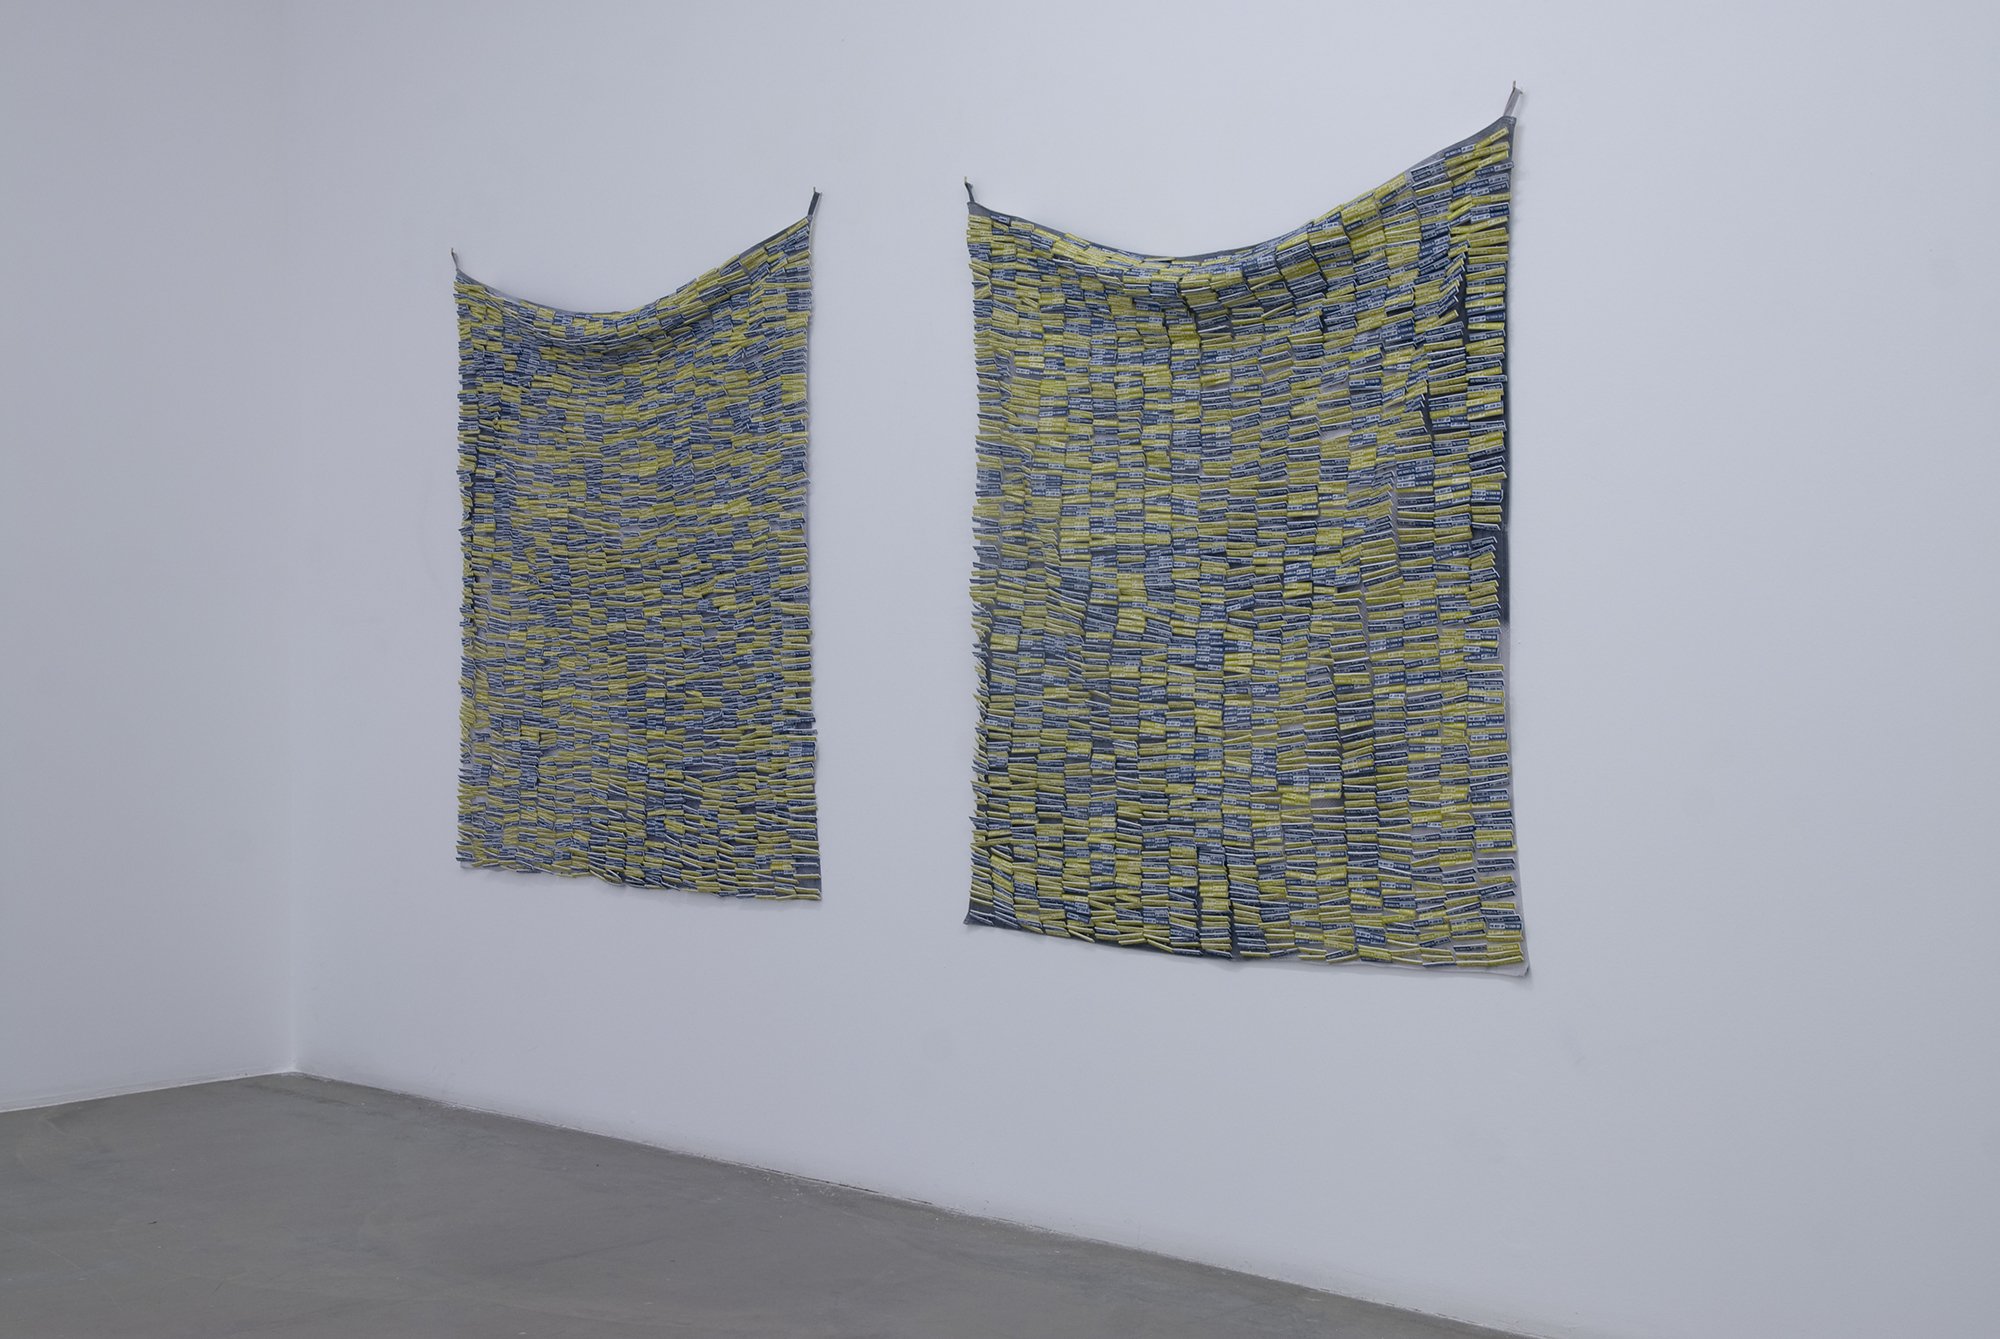 James Richards, The Best of / The Worst of, Diptych, PVC badges on printed nylon, 135 x 122 cm (53 1/8 x 48 in), 2011. Installation view, James Richards, Rodeo, Istanbul, 2011